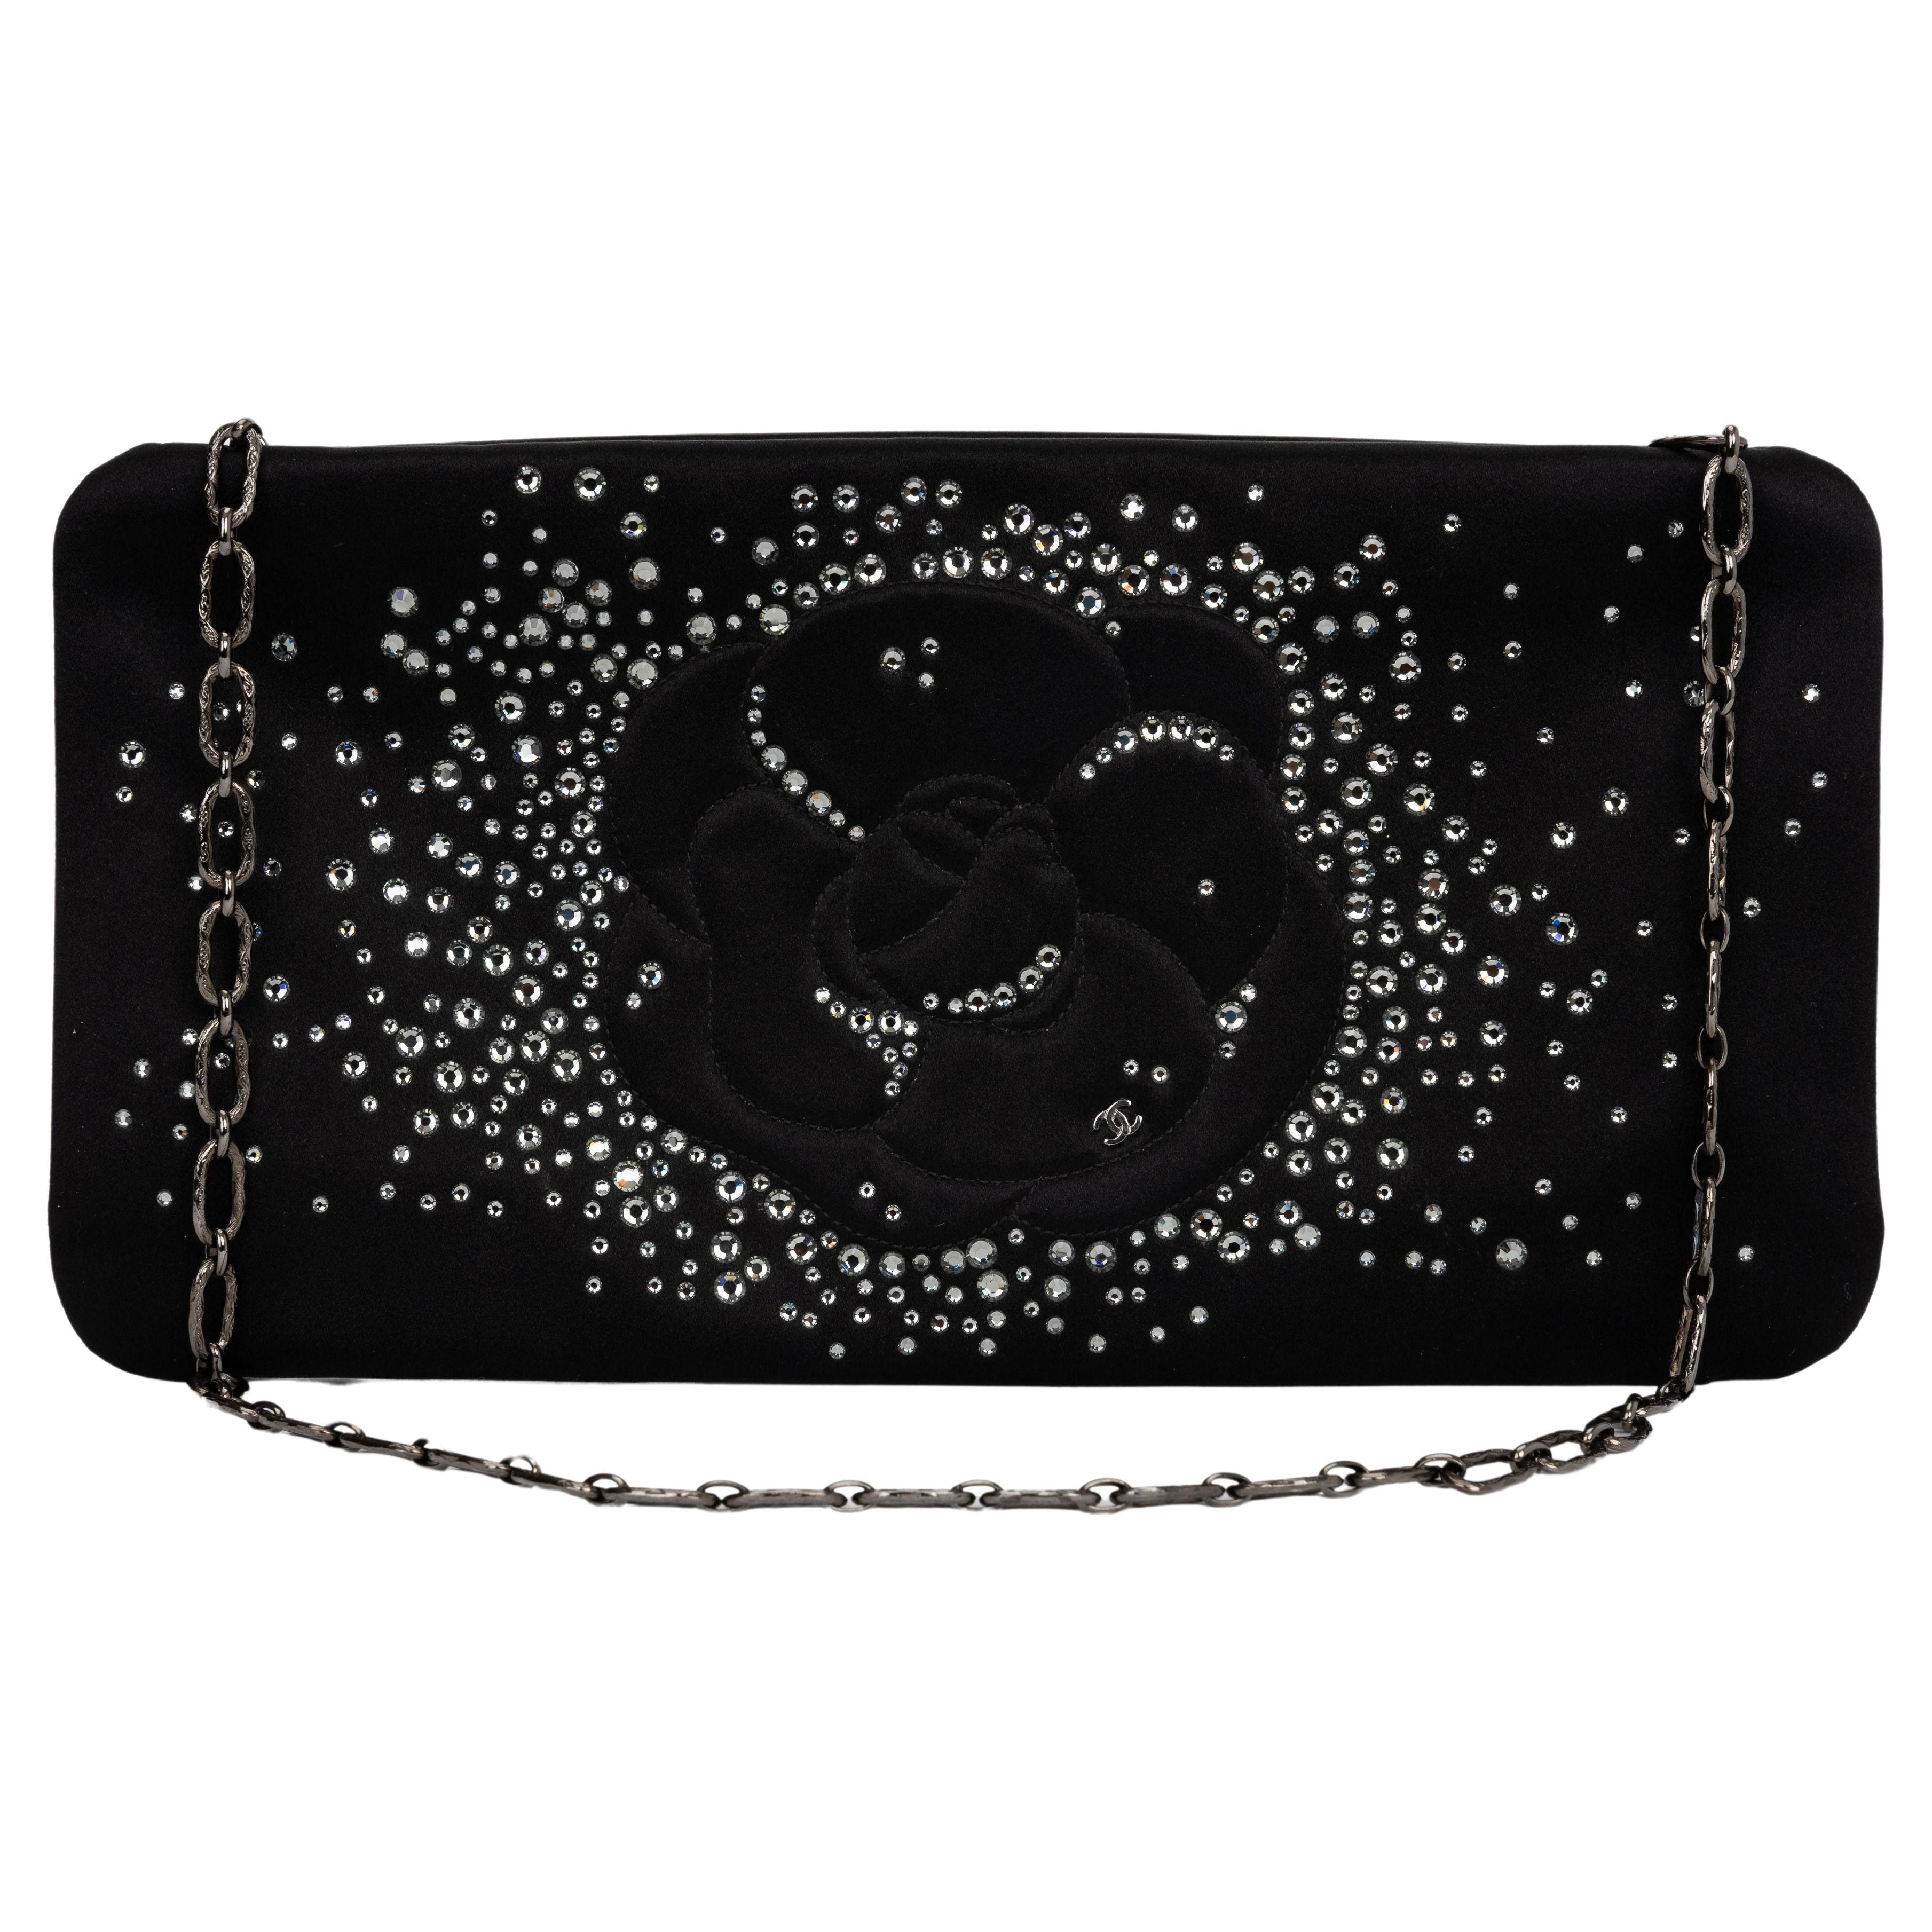 Chanel Black Satin Strass Camellia Clutch For Sale